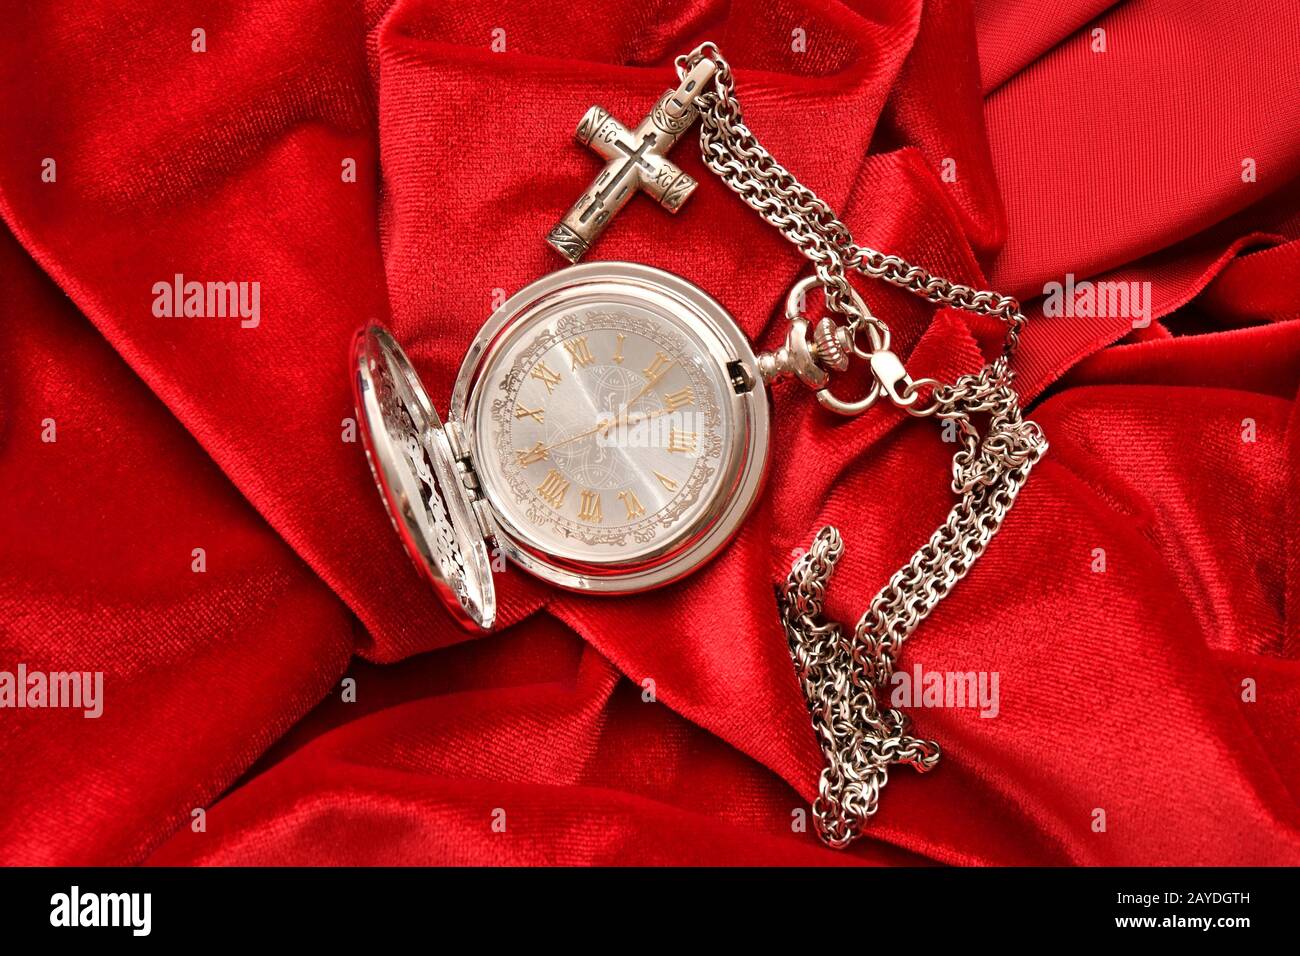 Concept-accuracy politeness of Kings, Pocket Watch Stock Photo